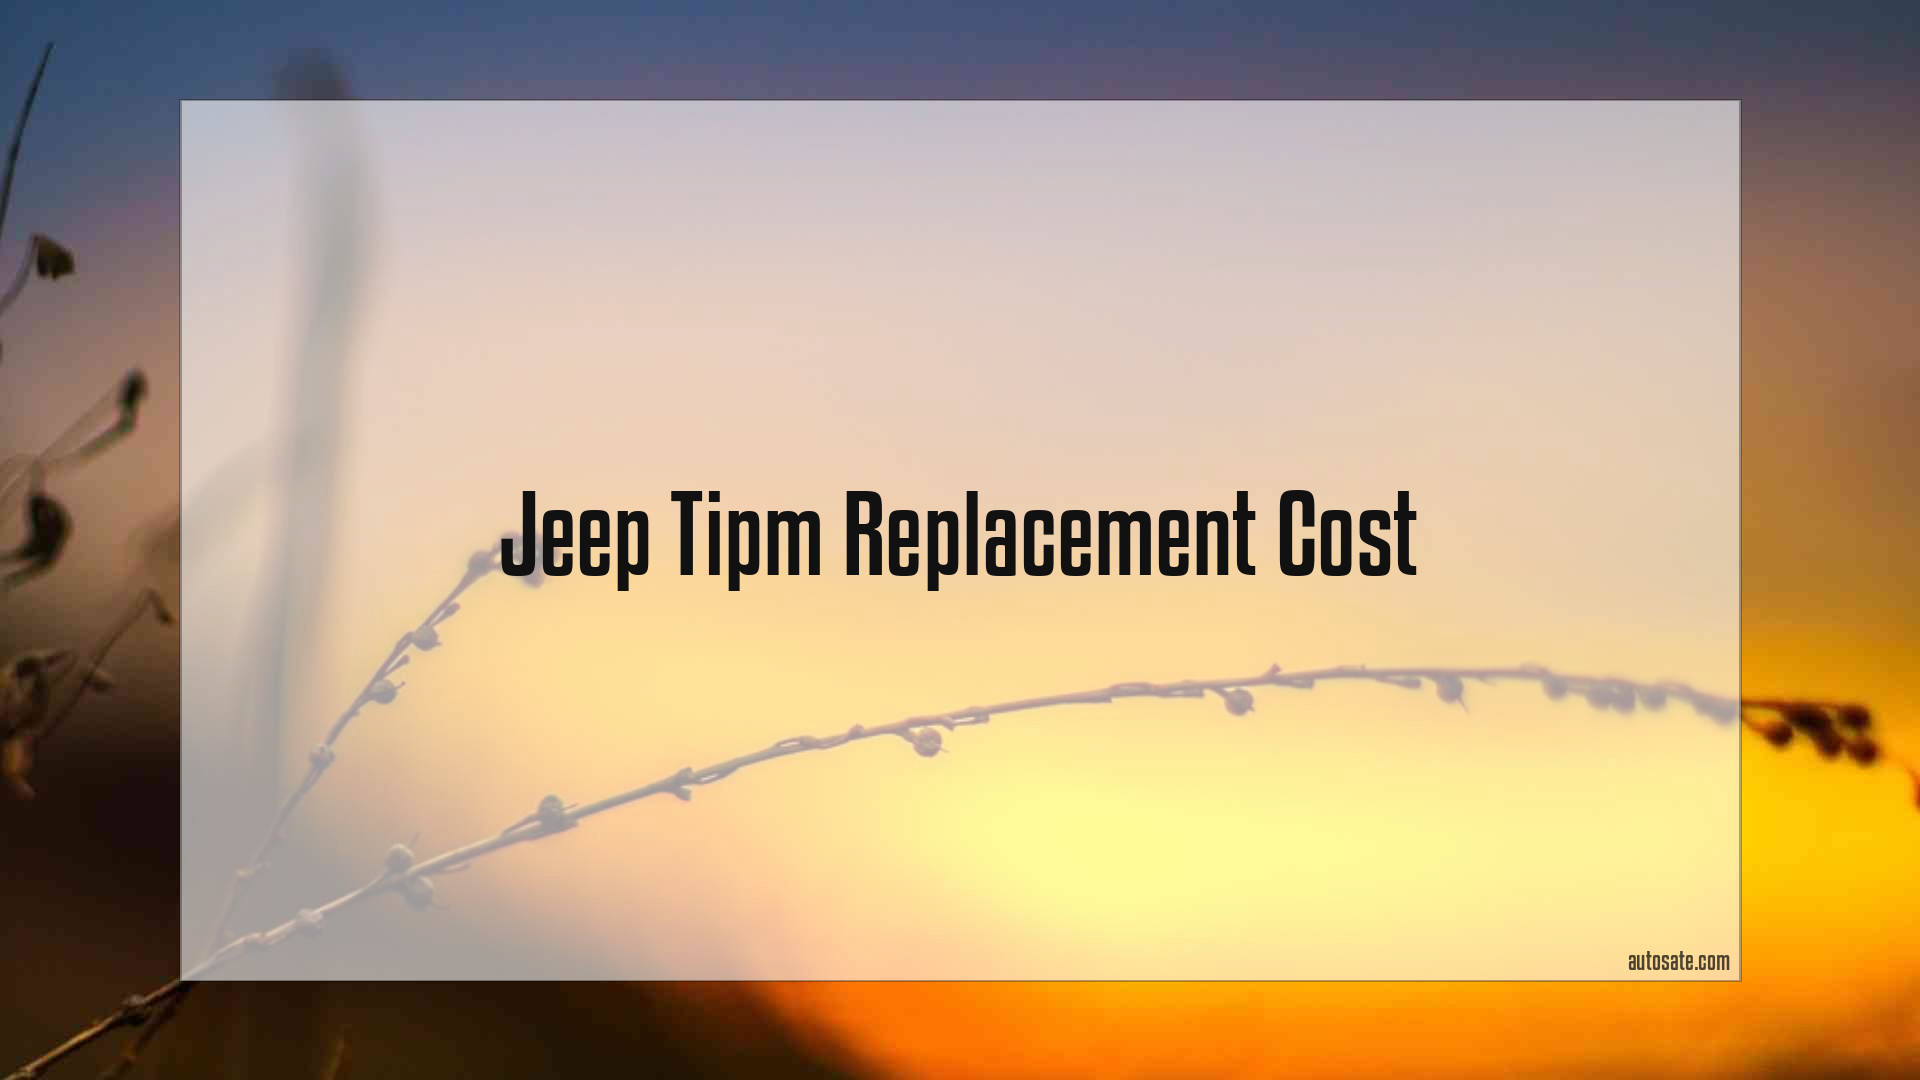 Jeep Tipm Replacement Cost